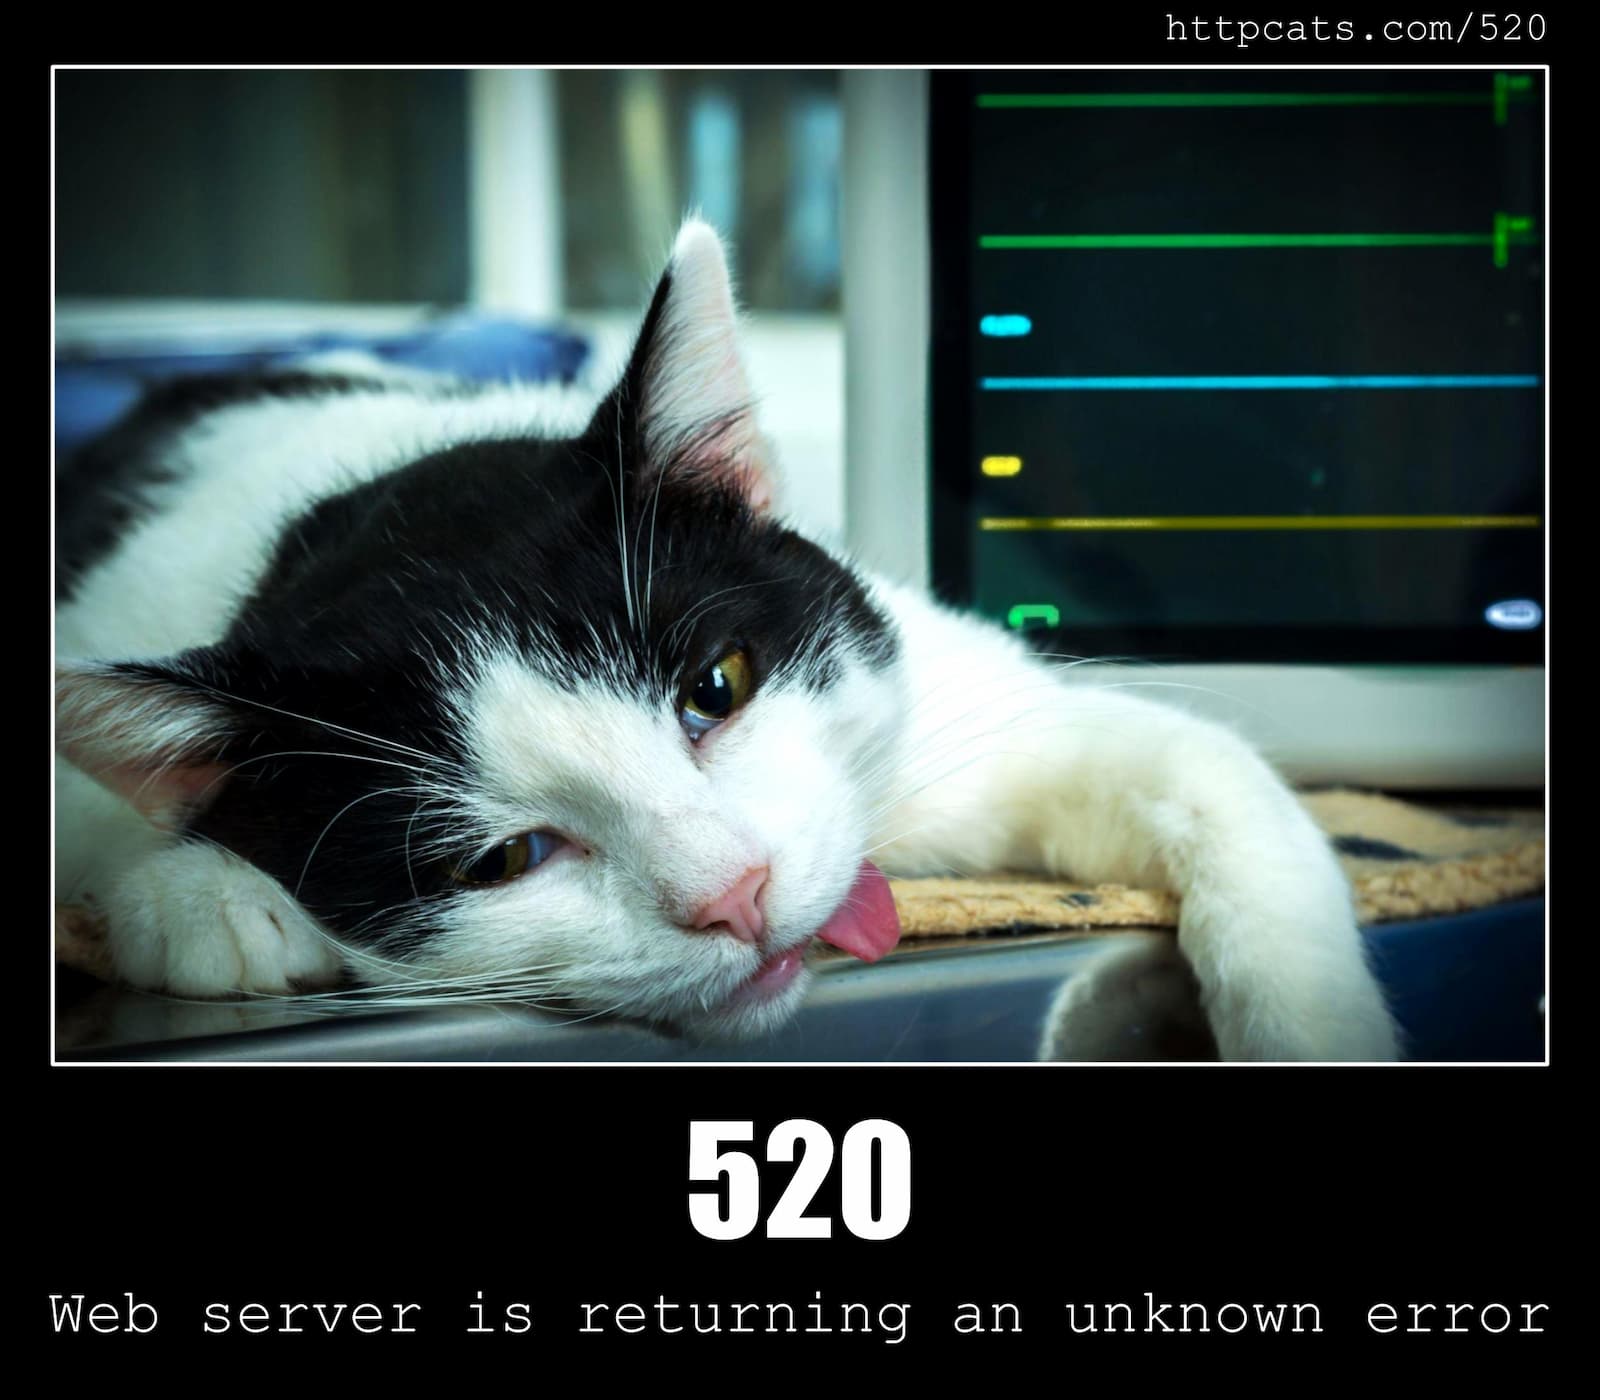 HTTP Status Code 520 Web server is returning an unknown error & Cats